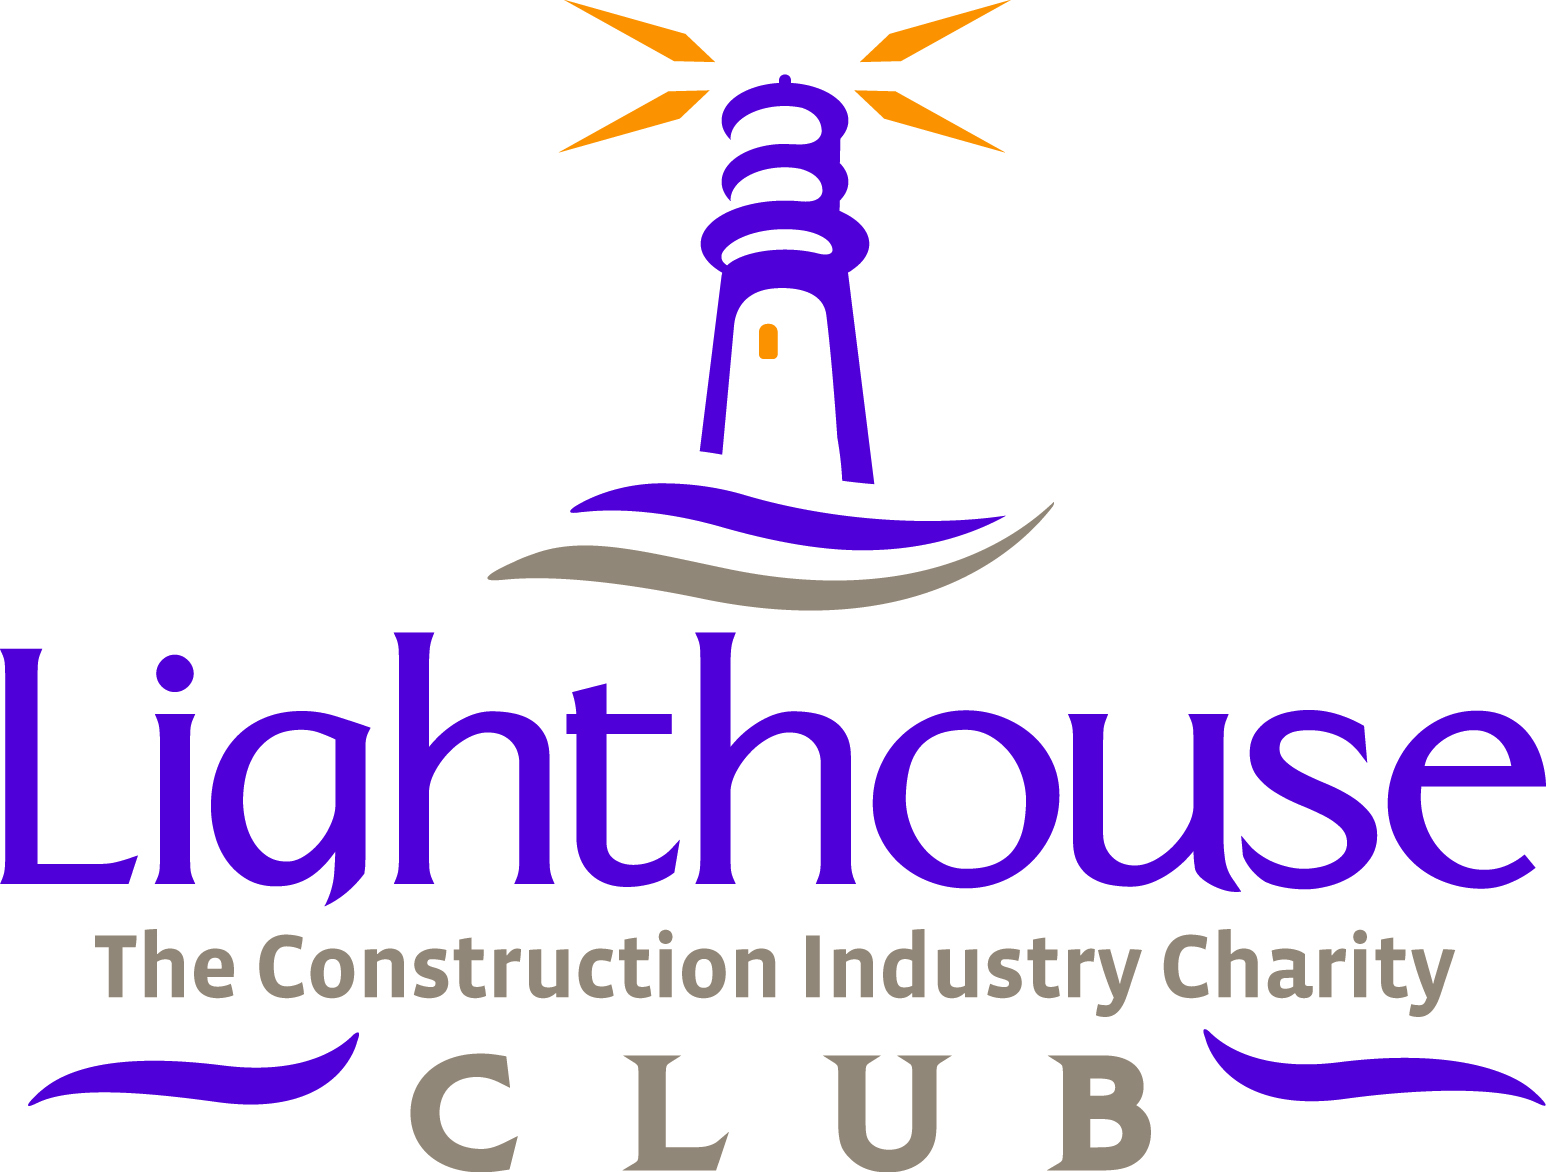 VGC announces the Lighthouse Club as corporate charity partner for 2022/3